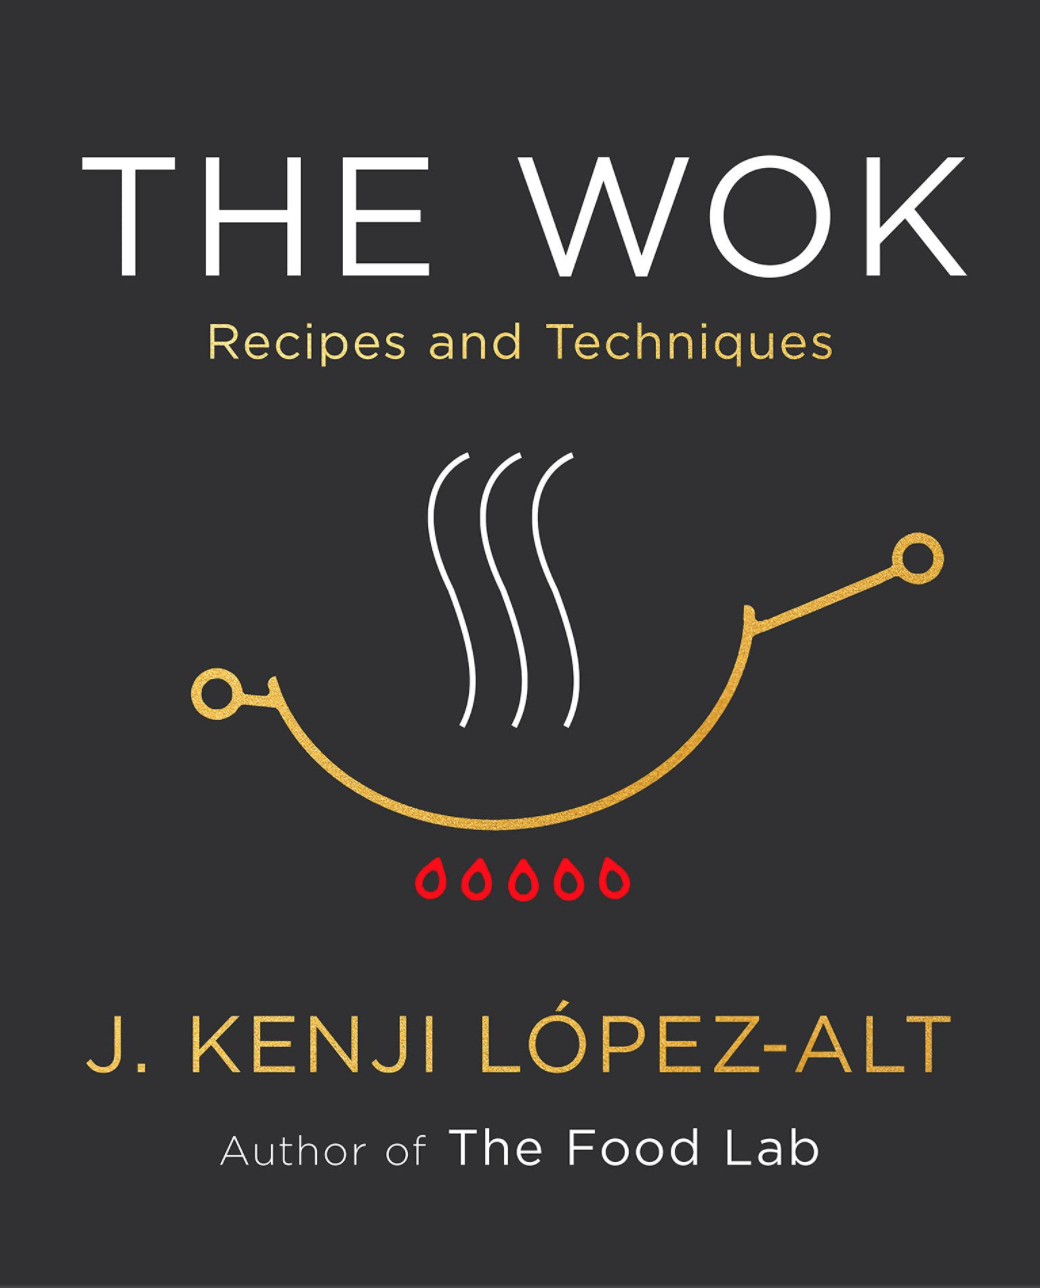 The Wok: Recipes and Techniques